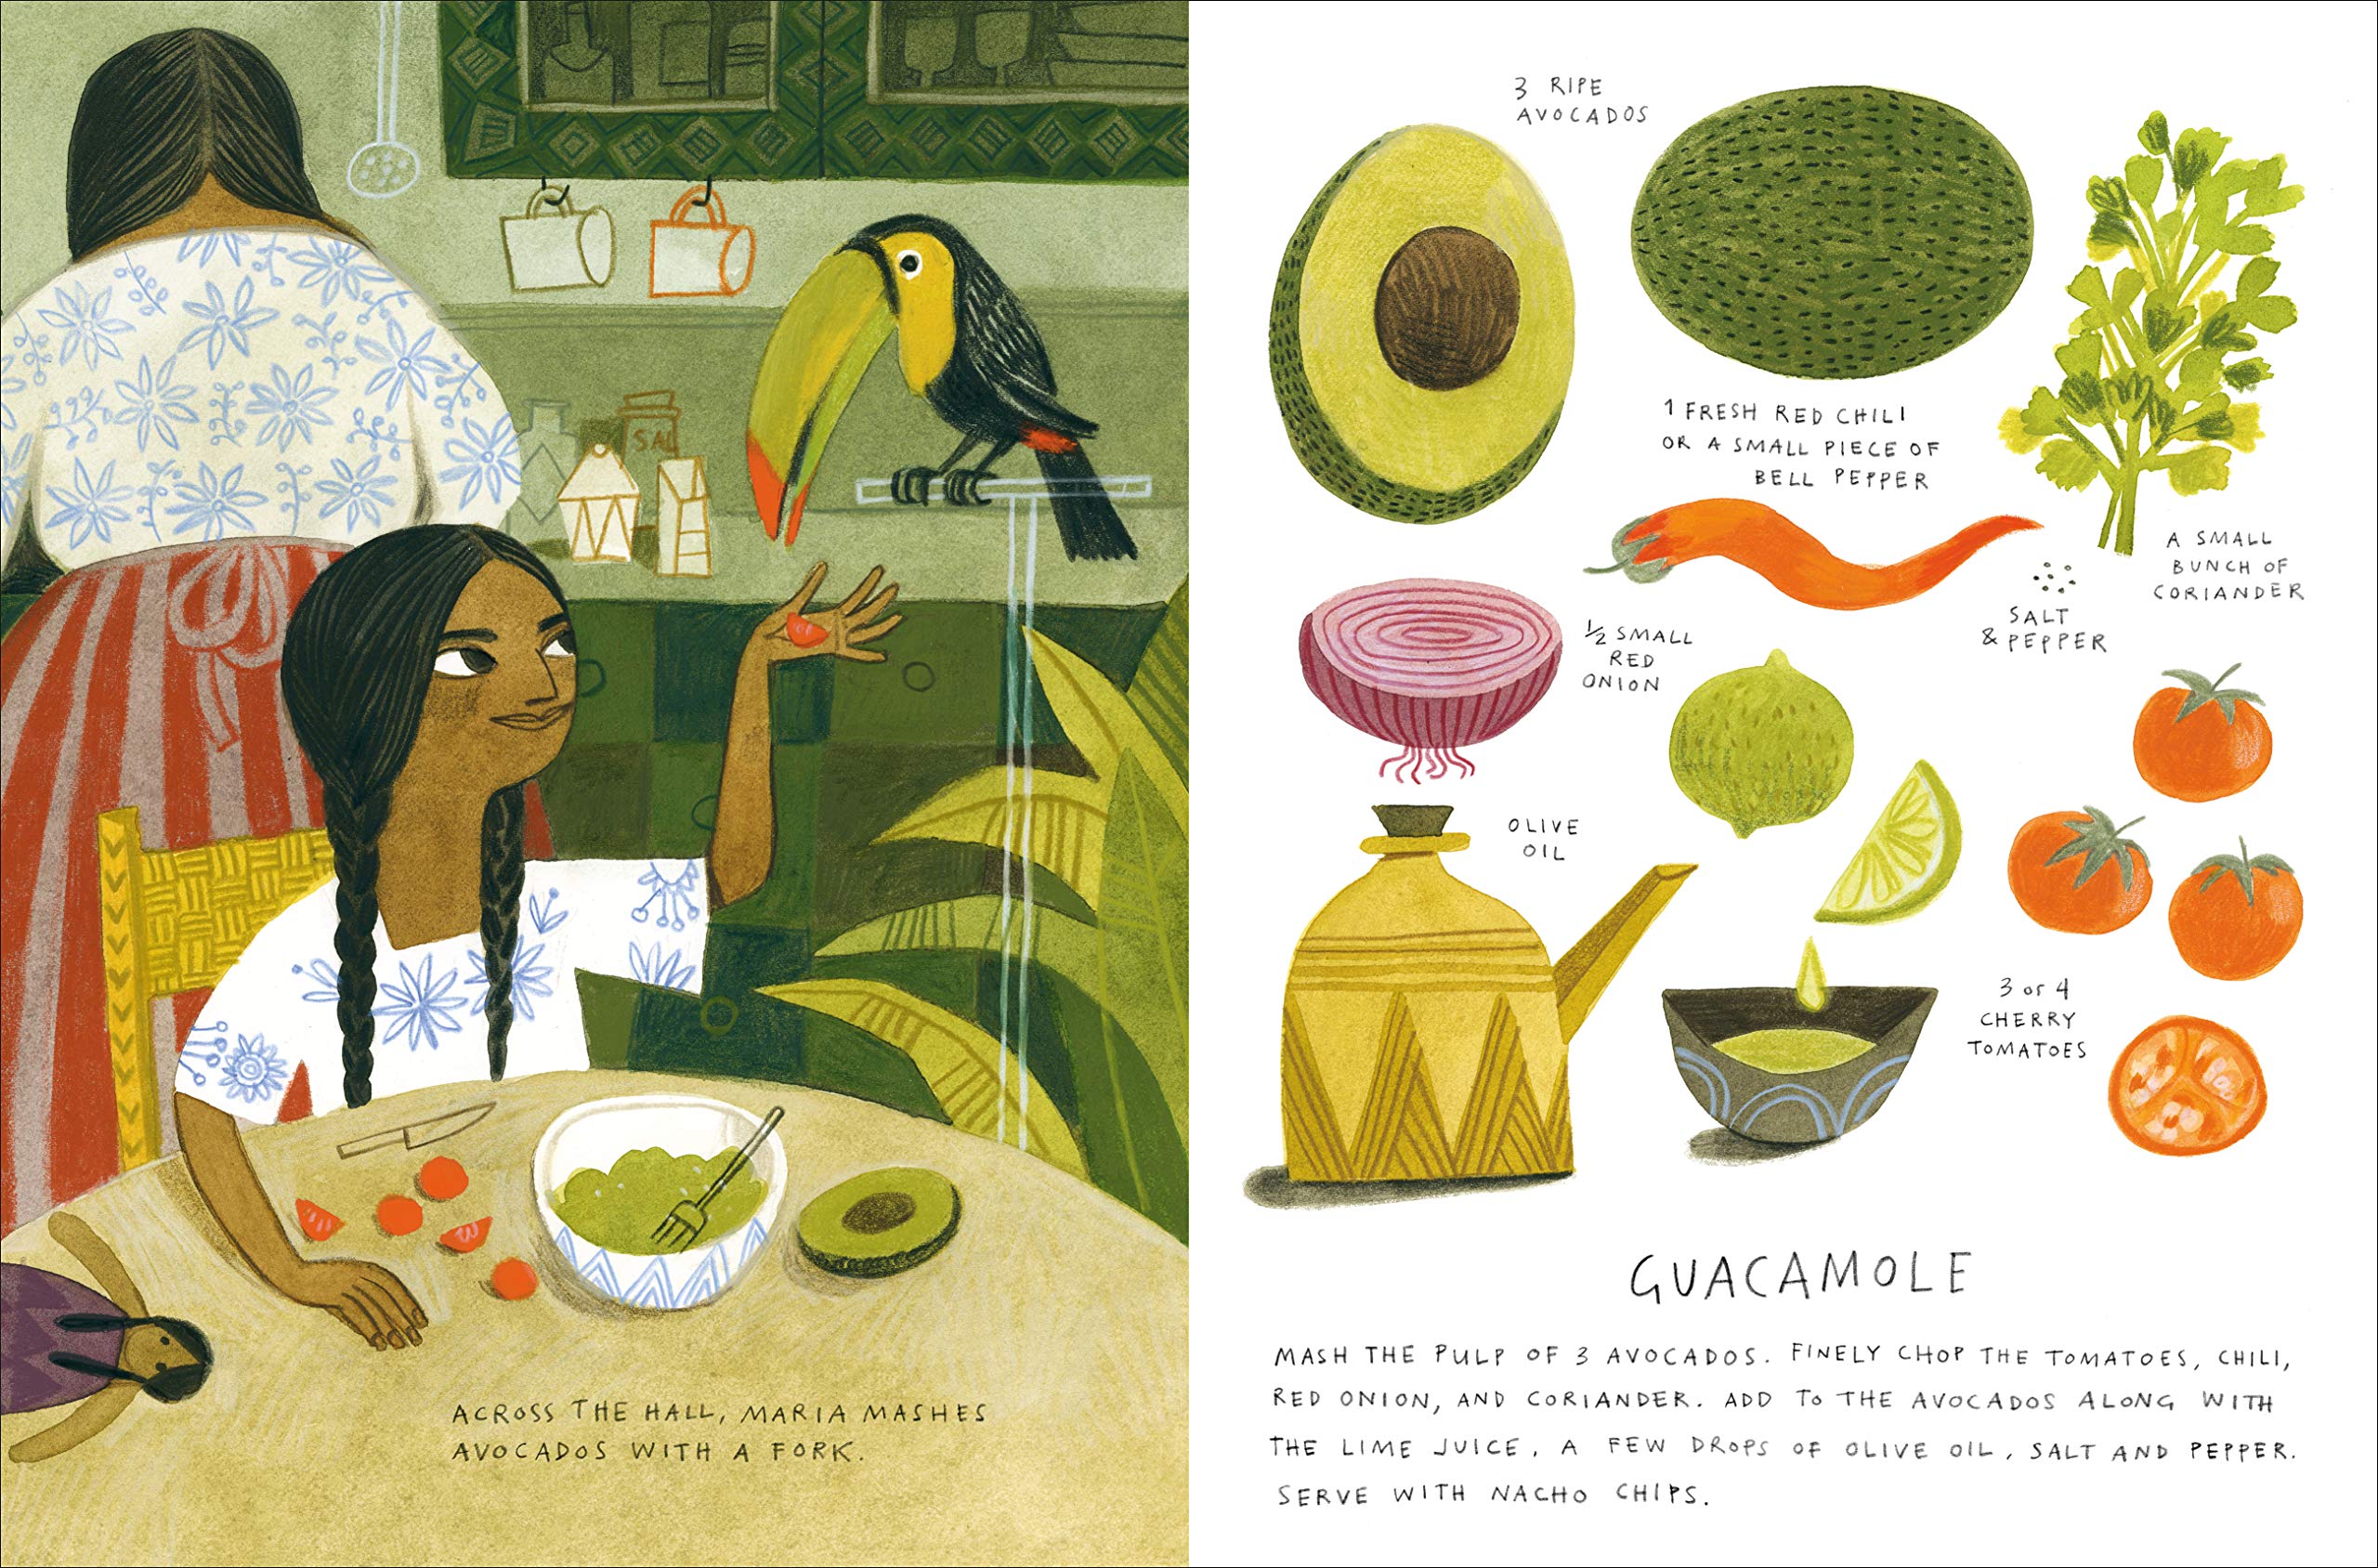 What’s Cooking at 10 Garden Street?: Recipes for Kids From Around the World (Felicita Sala)